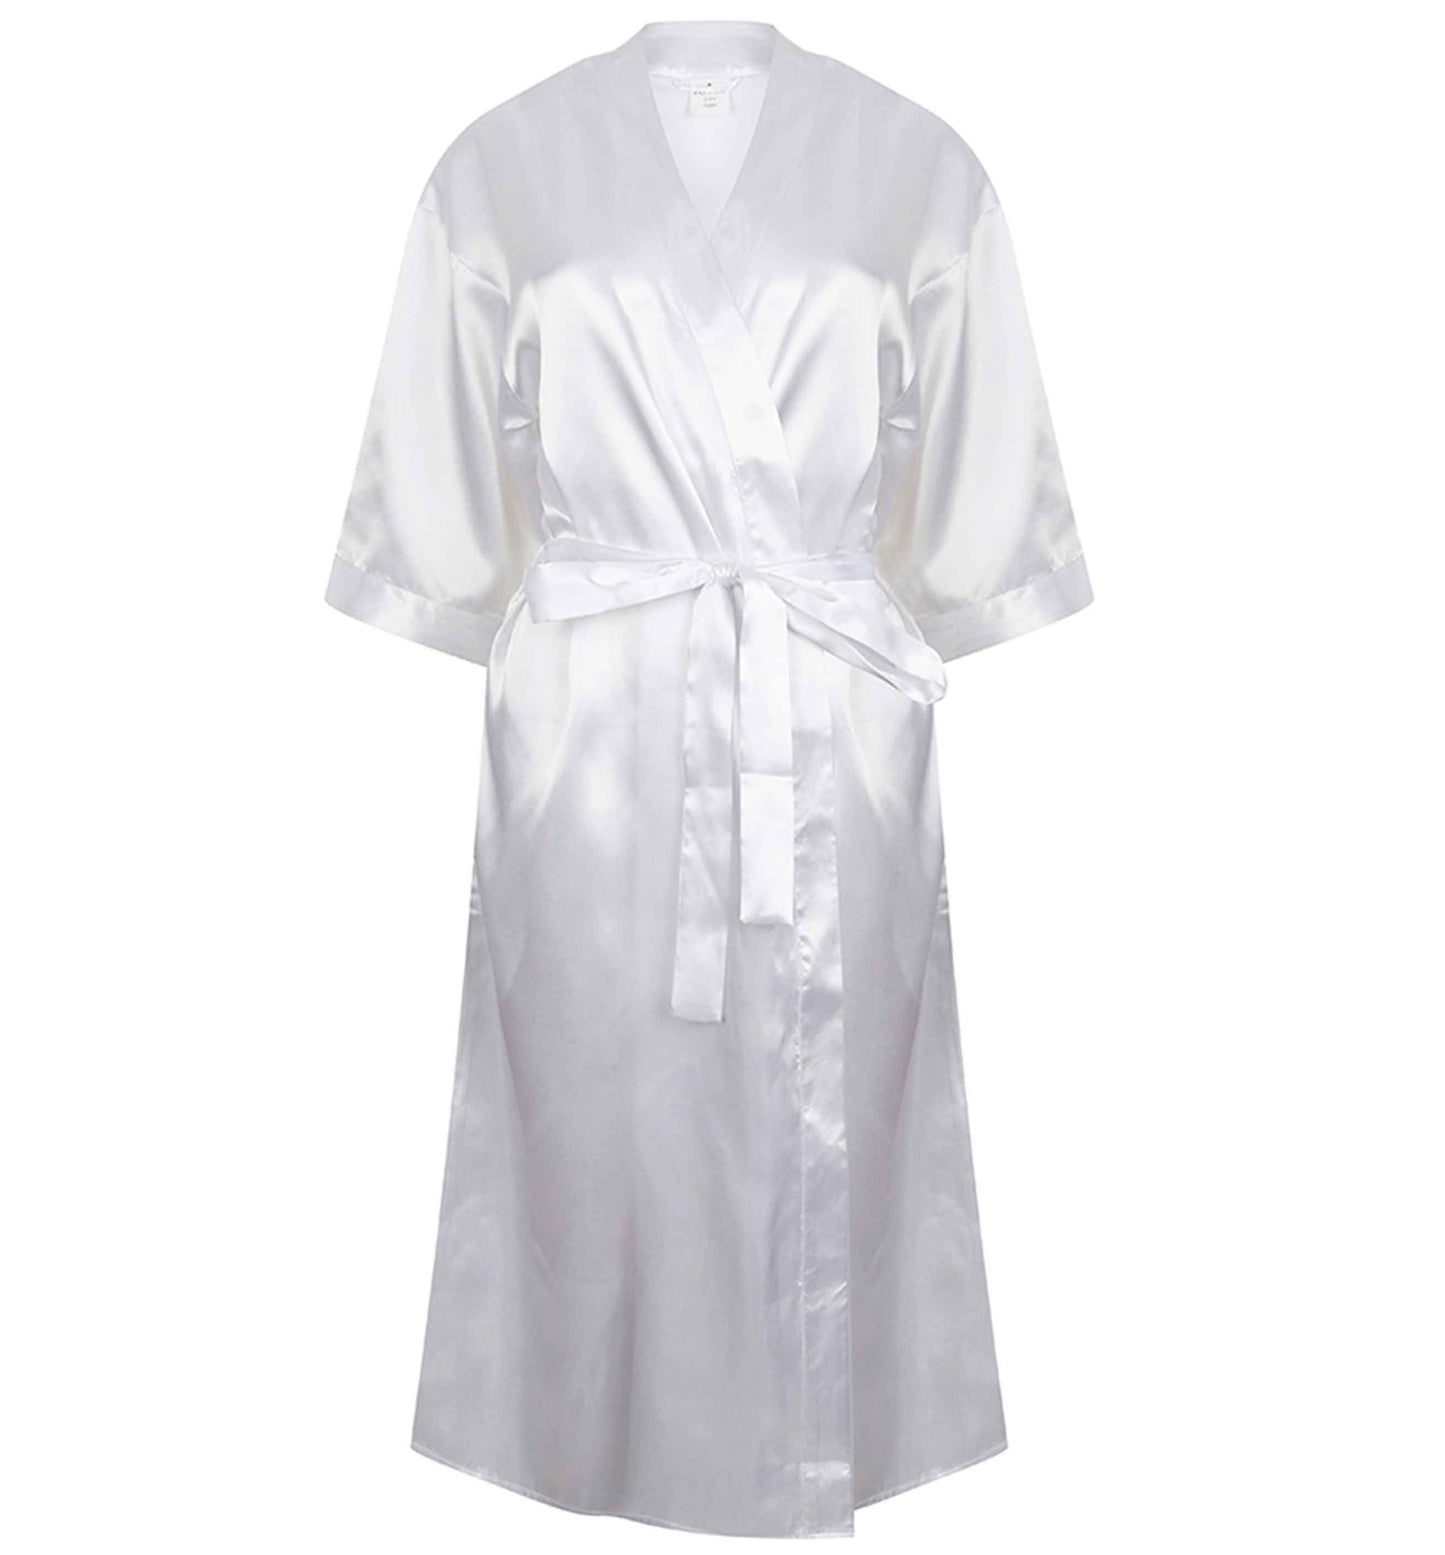 Any name here - is going to Lapland personalised elf | 8-18 | Kimono style satin robe | Ladies dressing gown